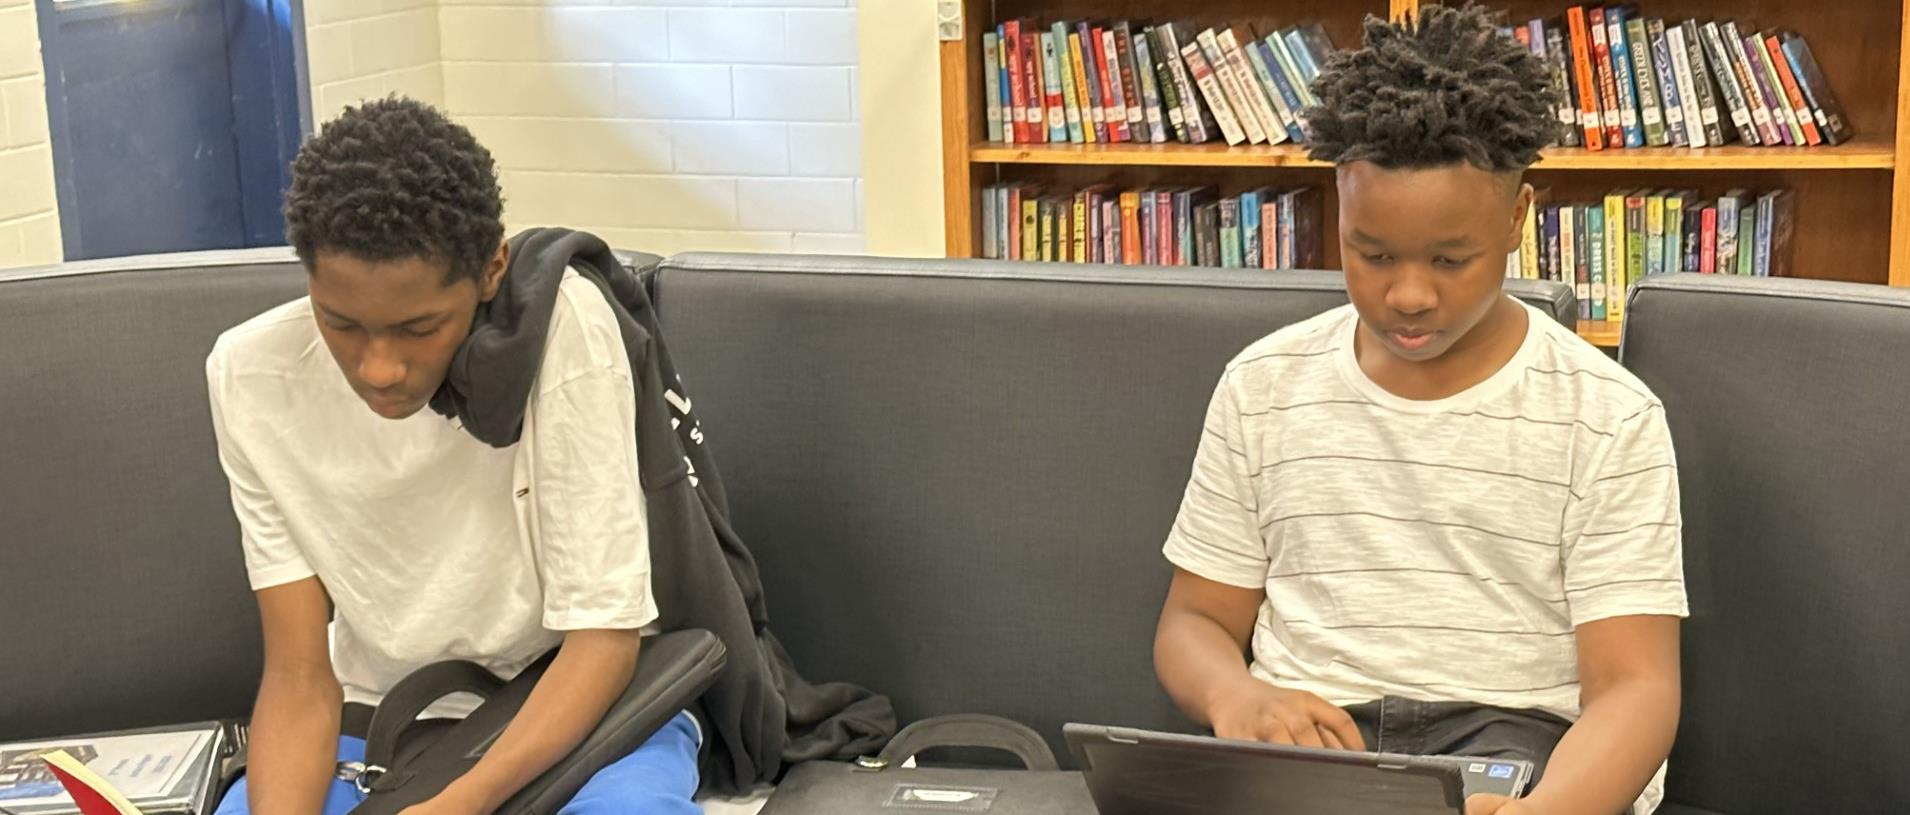 students with laptop sitting on chair 